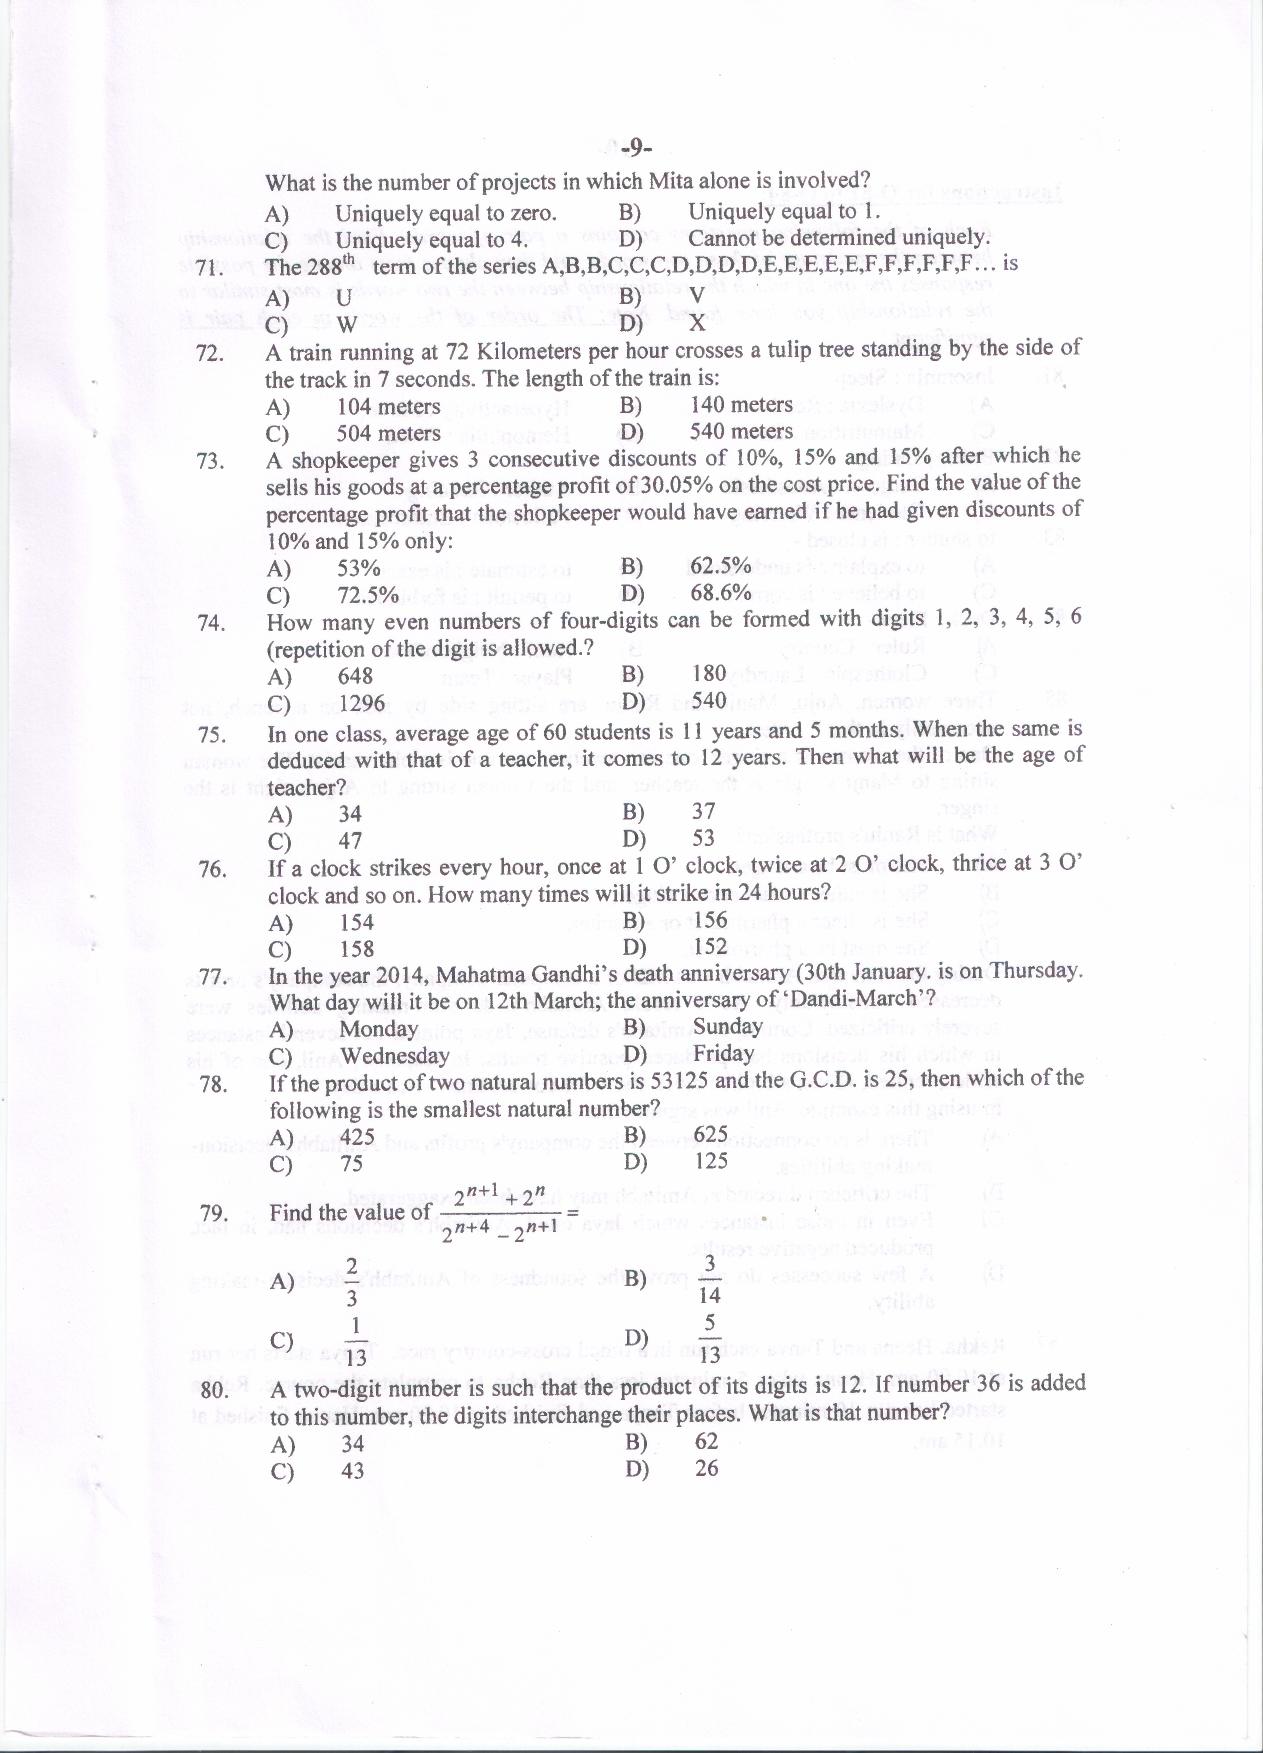 PU MET 2014 Question Booklet with Key - Page 9